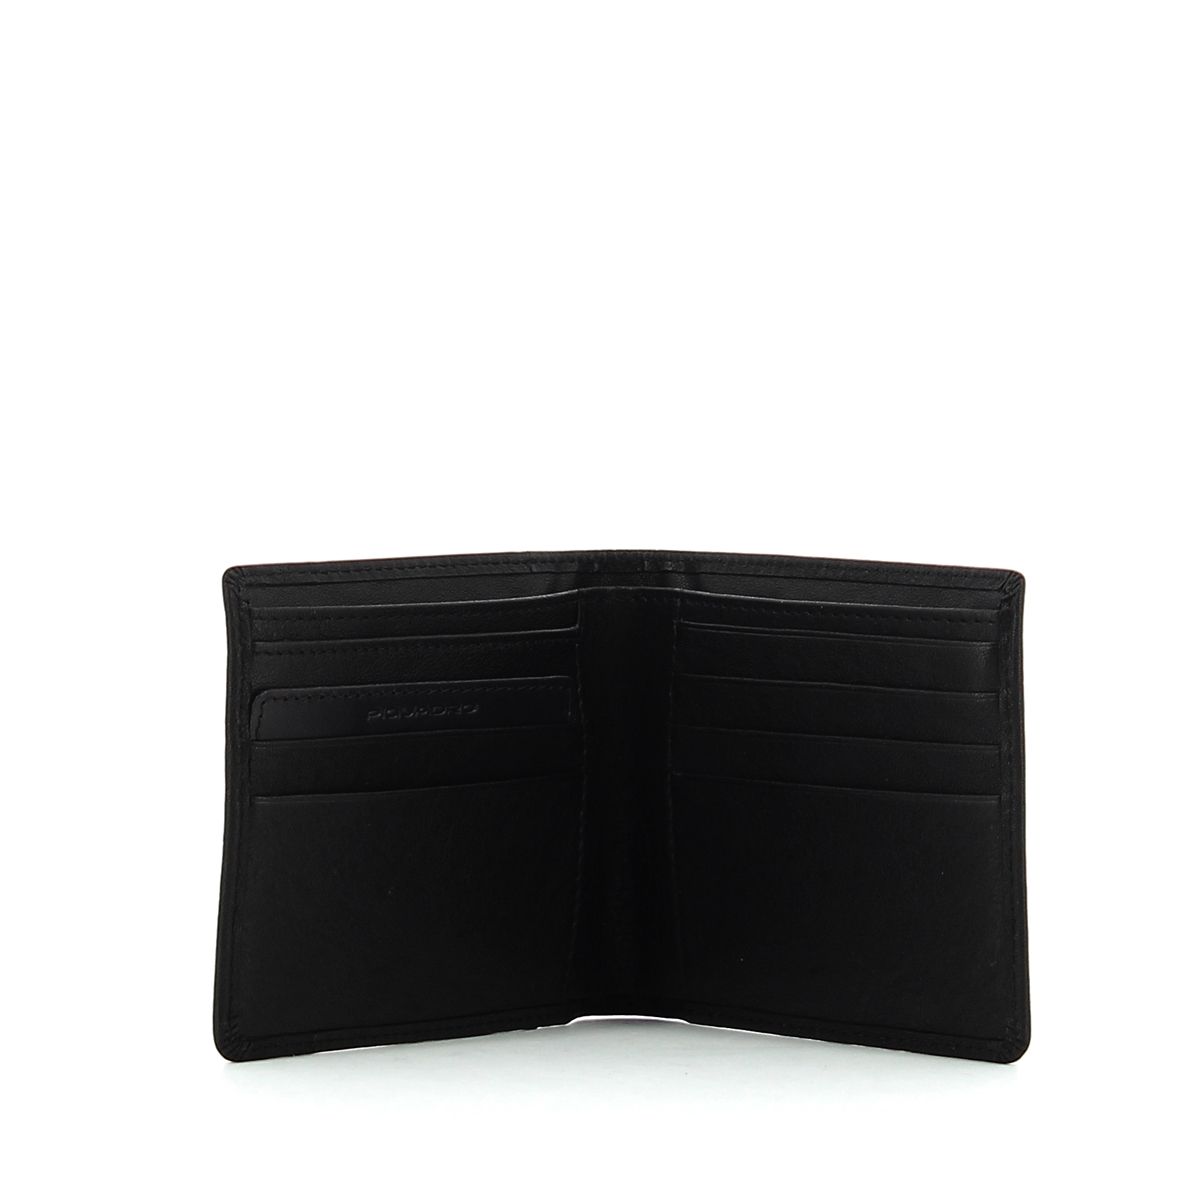 Seven compartment wallet Brief Piquadro, slim and sleek men accessory made entirely in genuine leather, with bill compartment and small logo.